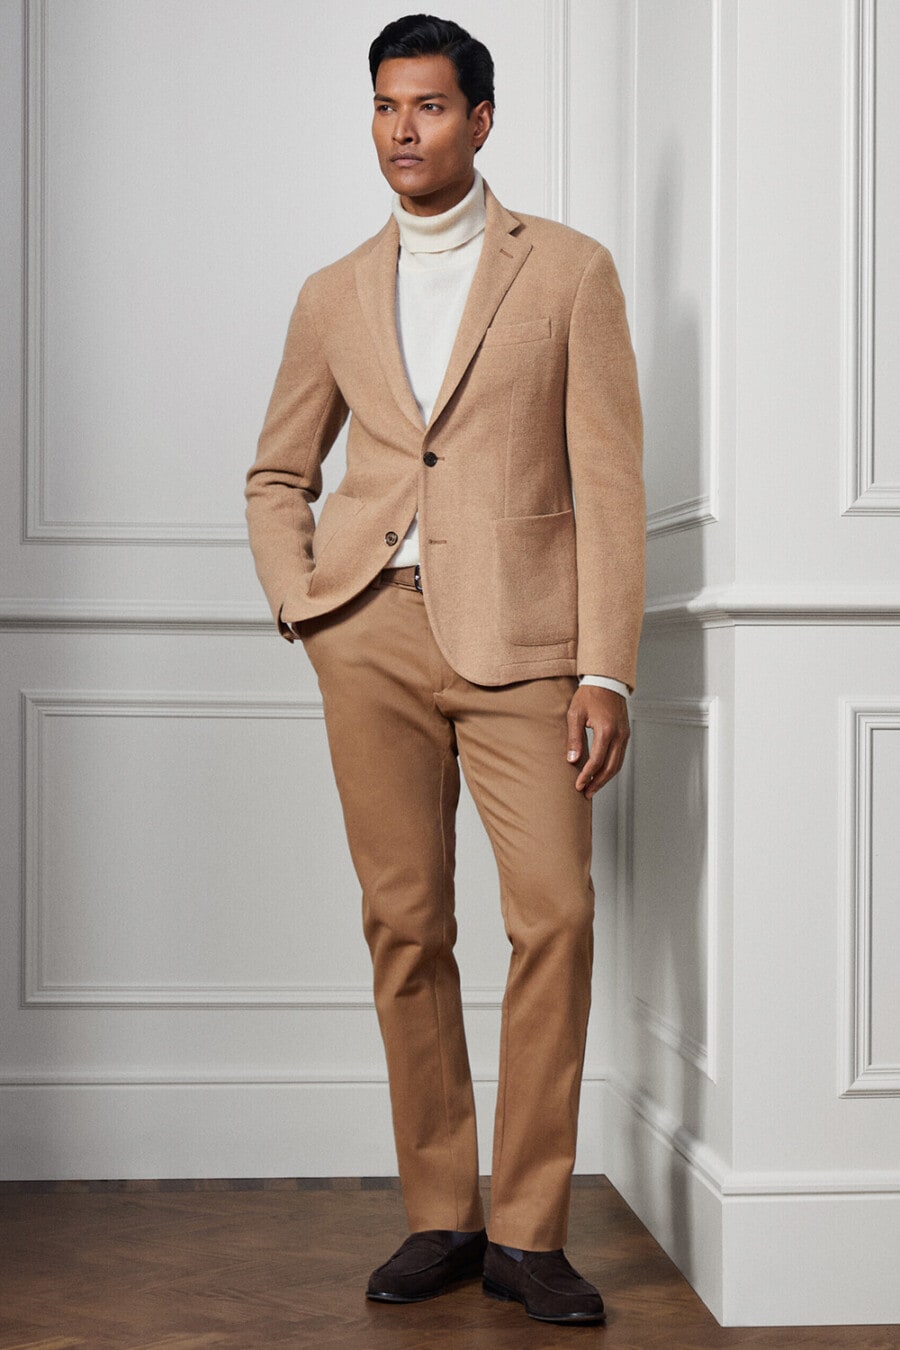 Men's khaki chinos, white turtleneck, camel blazer and brown suede penny loafers outfit